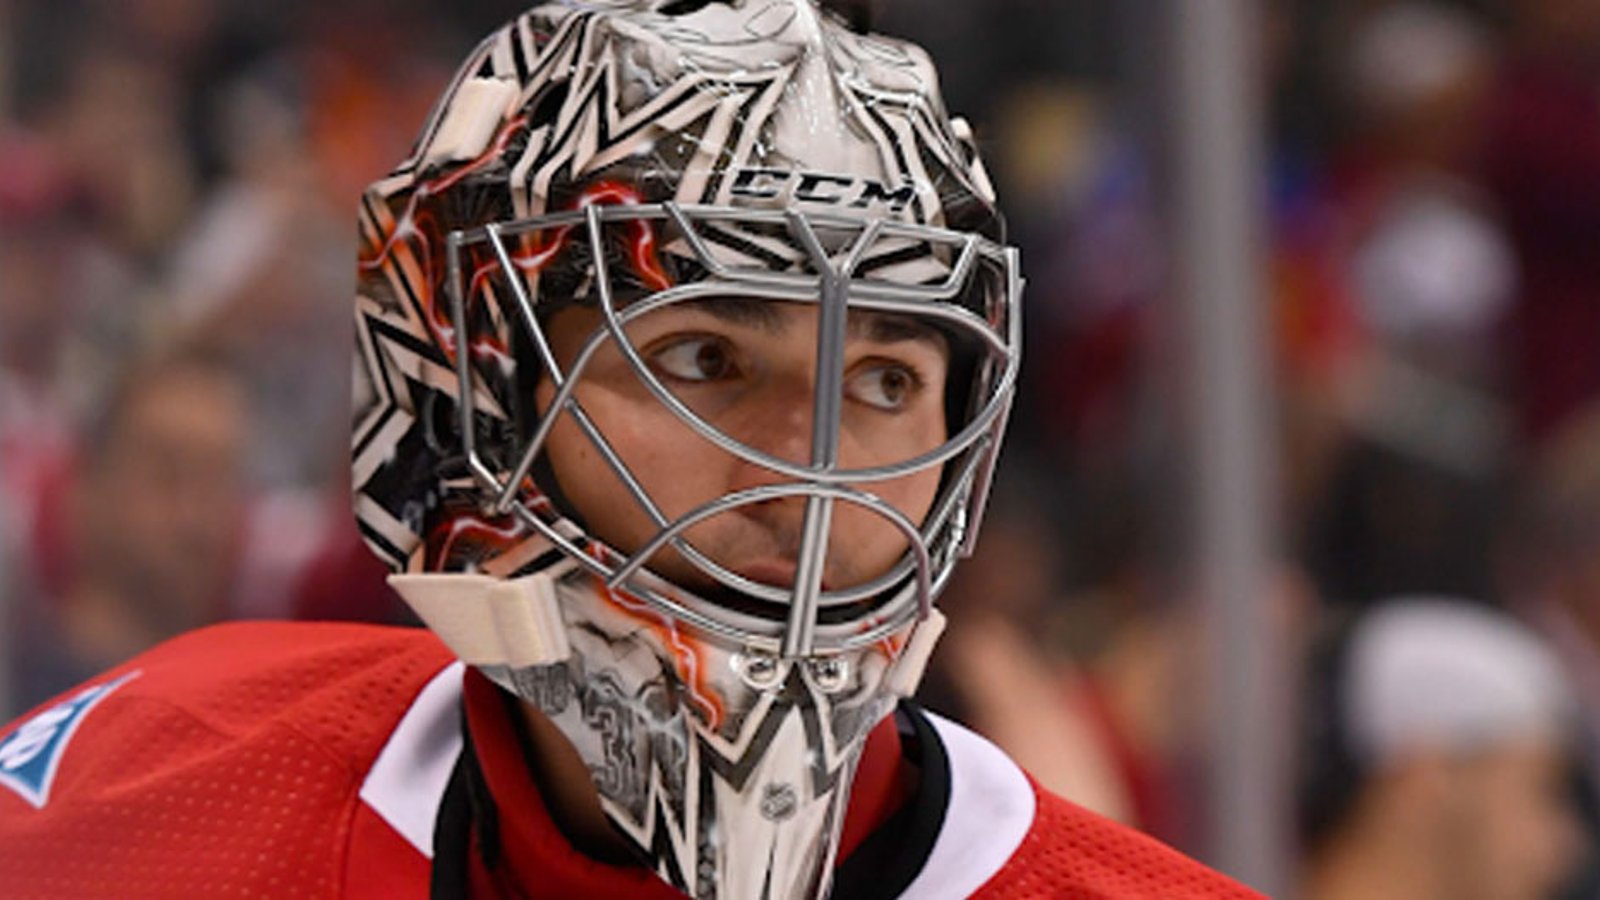 Report: Price will be Canada's starter at the Olympics despite not playing this season at all